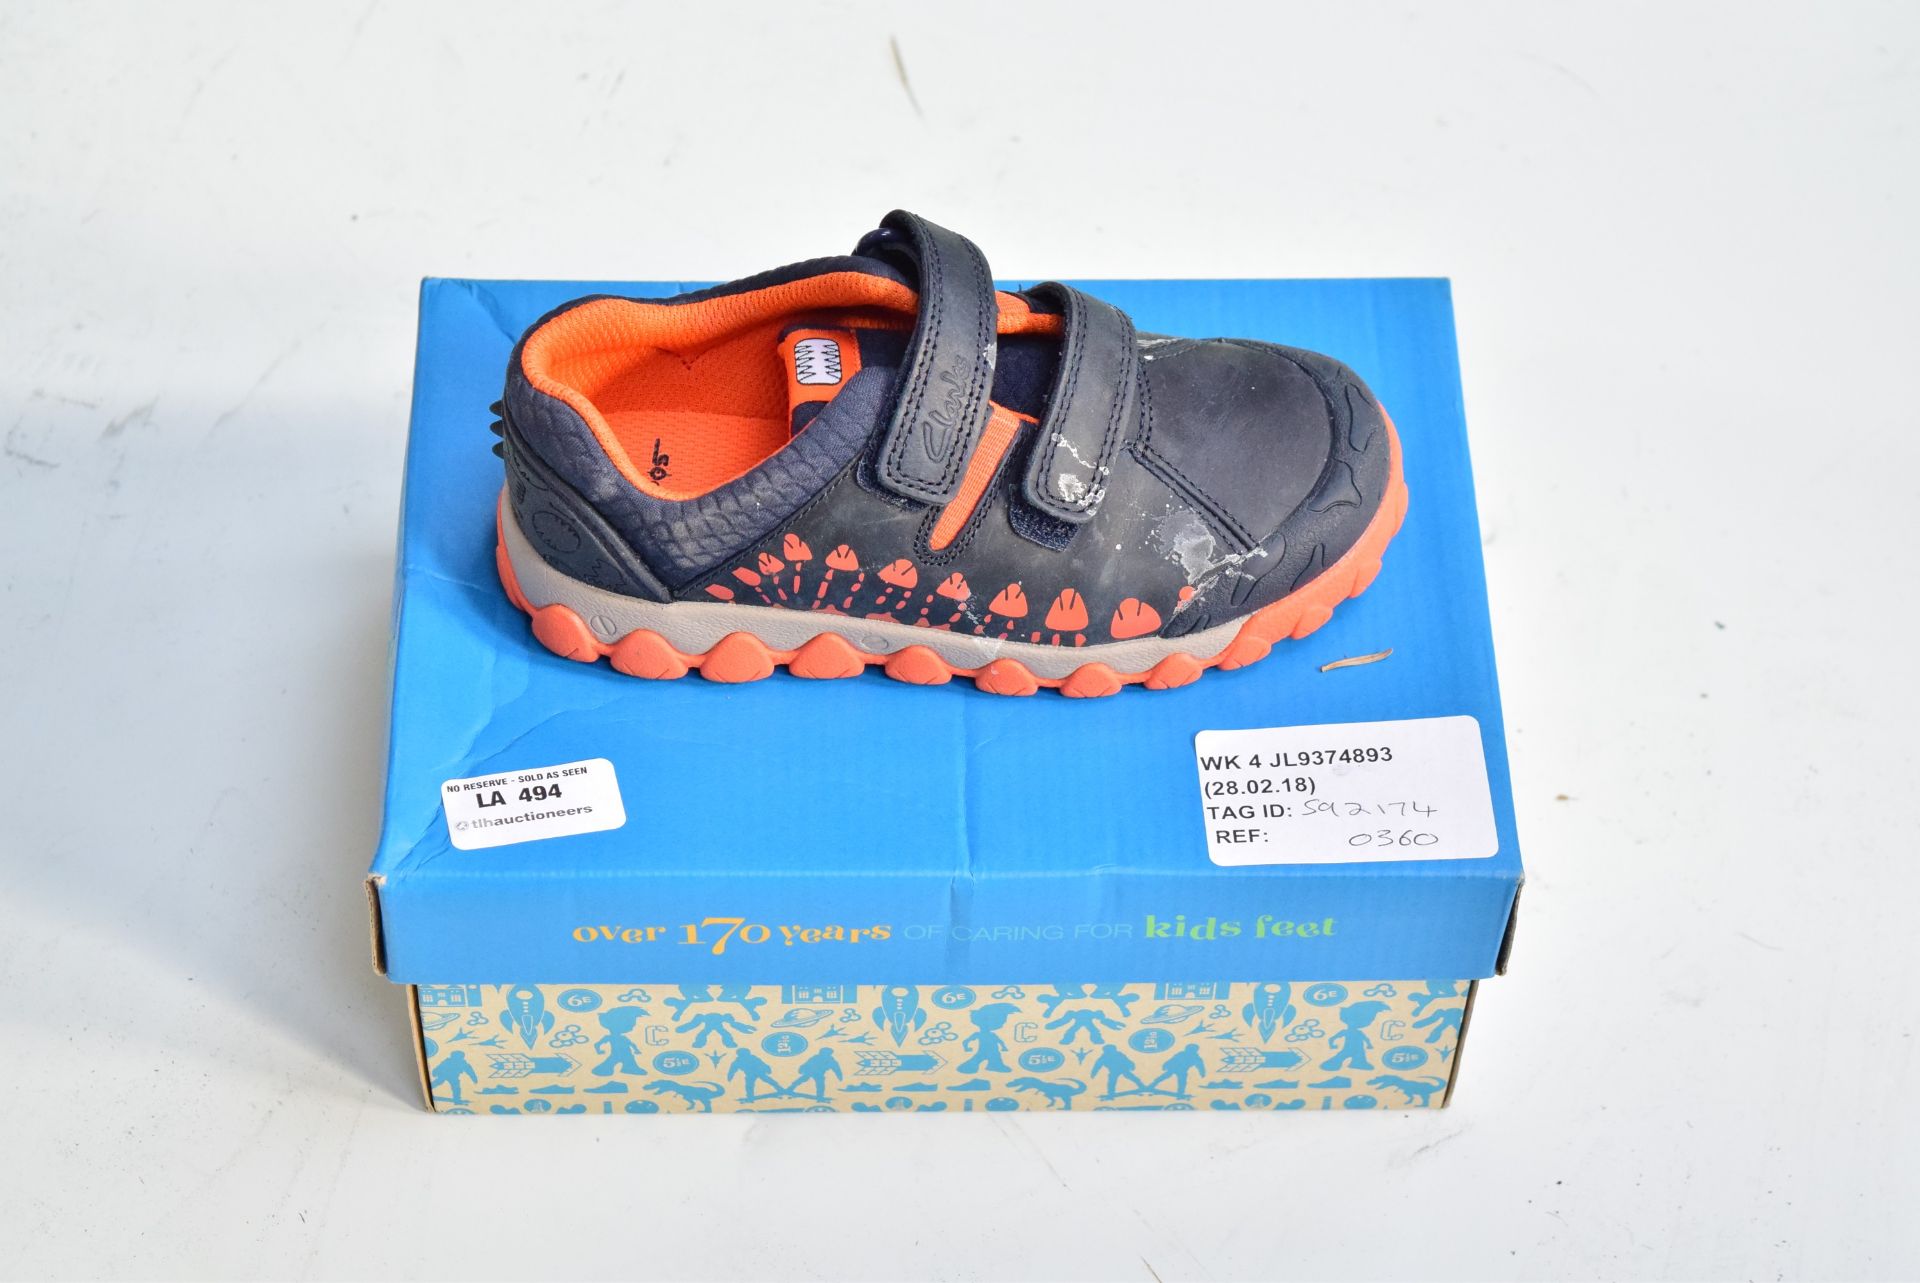 1 X BOXED CLARKS CHILDRENS STRAPPED SHOES SIZE 11.5G RRP £35 28.02.18 592174 W494